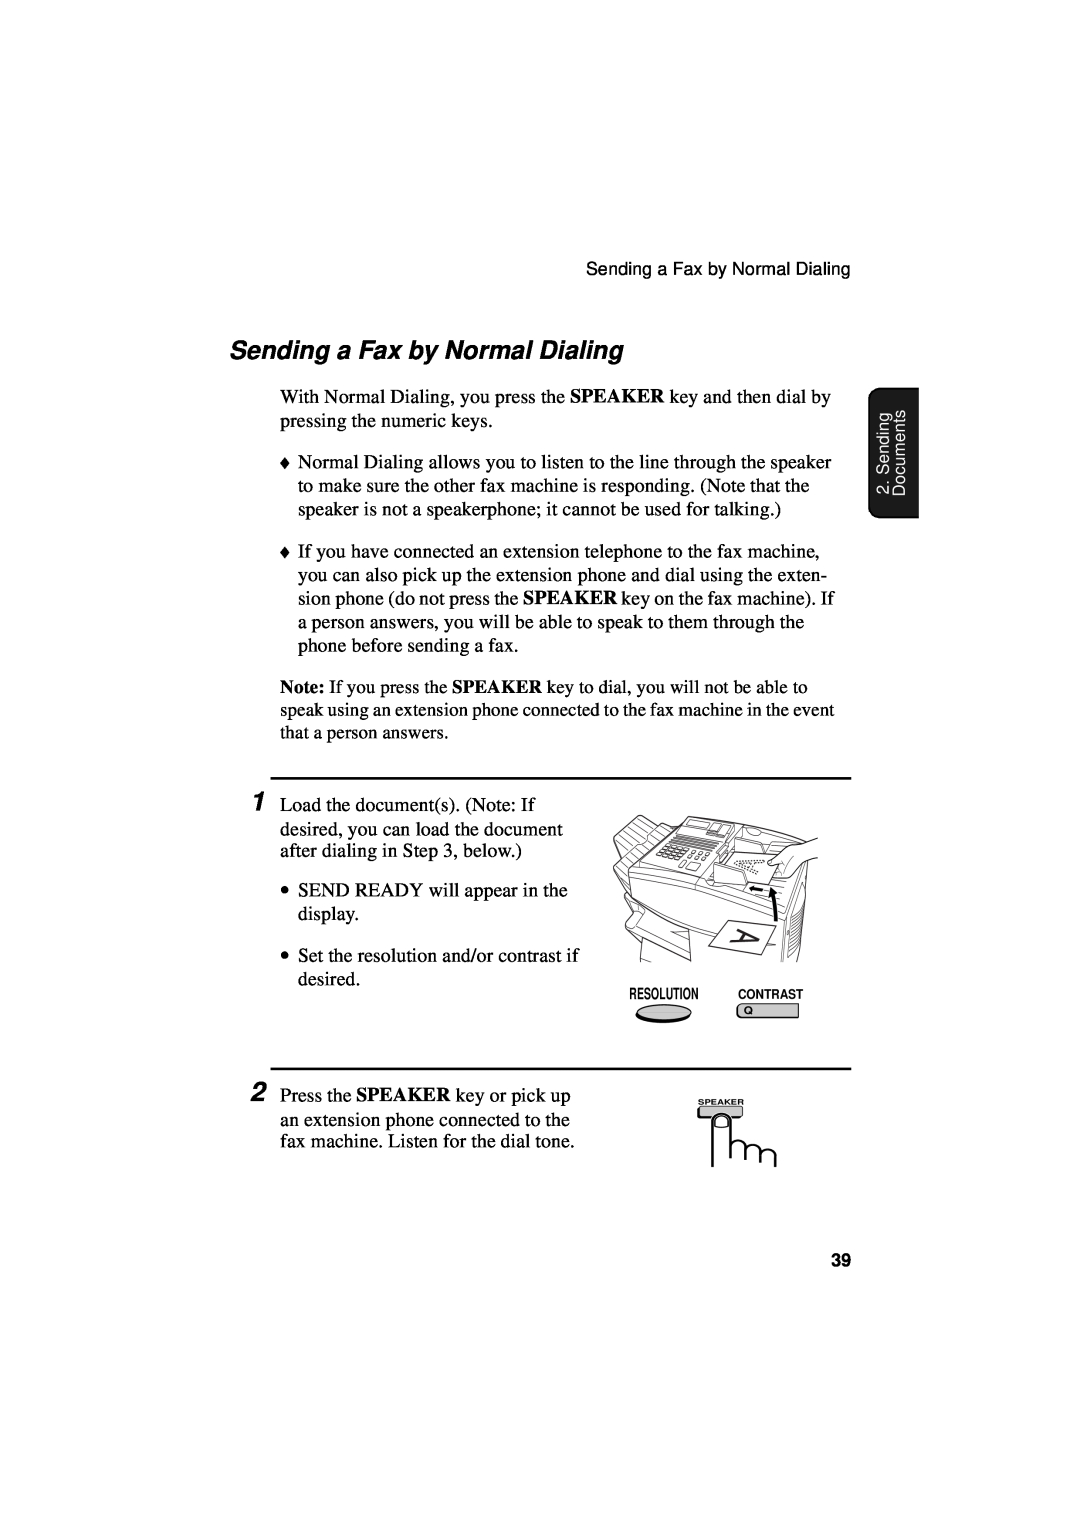 Sharp FO-5550, FO-5700, FO-4700 operation manual Sending a Fax by Normal Dialing 